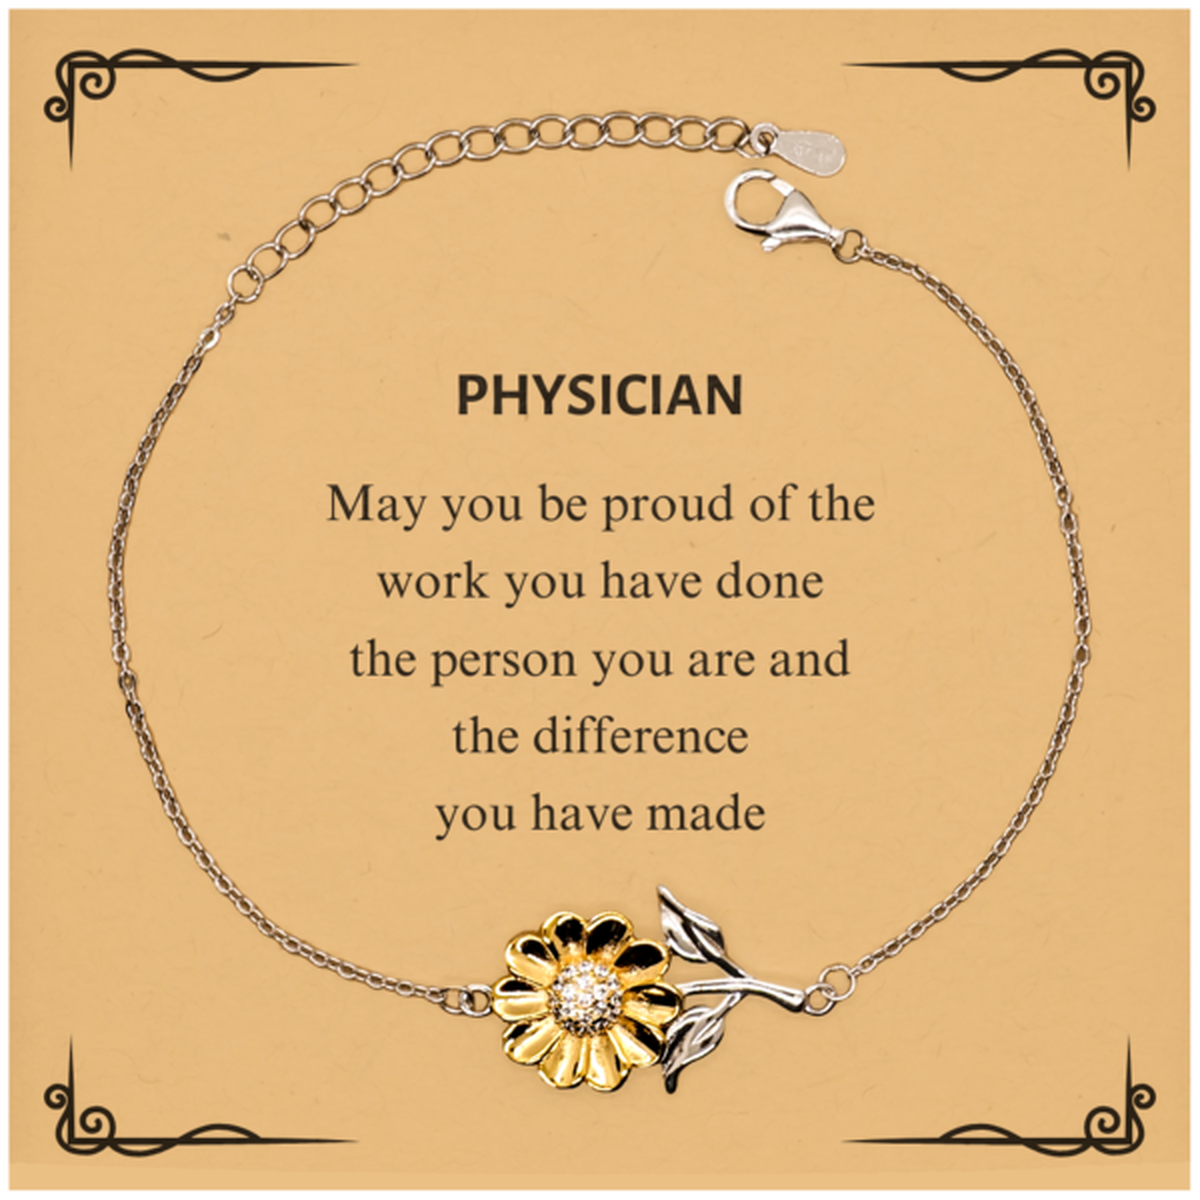 Physician May you be proud of the work you have done, Retirement Physician Sunflower Bracelet for Colleague Appreciation Gifts Amazing for Physician